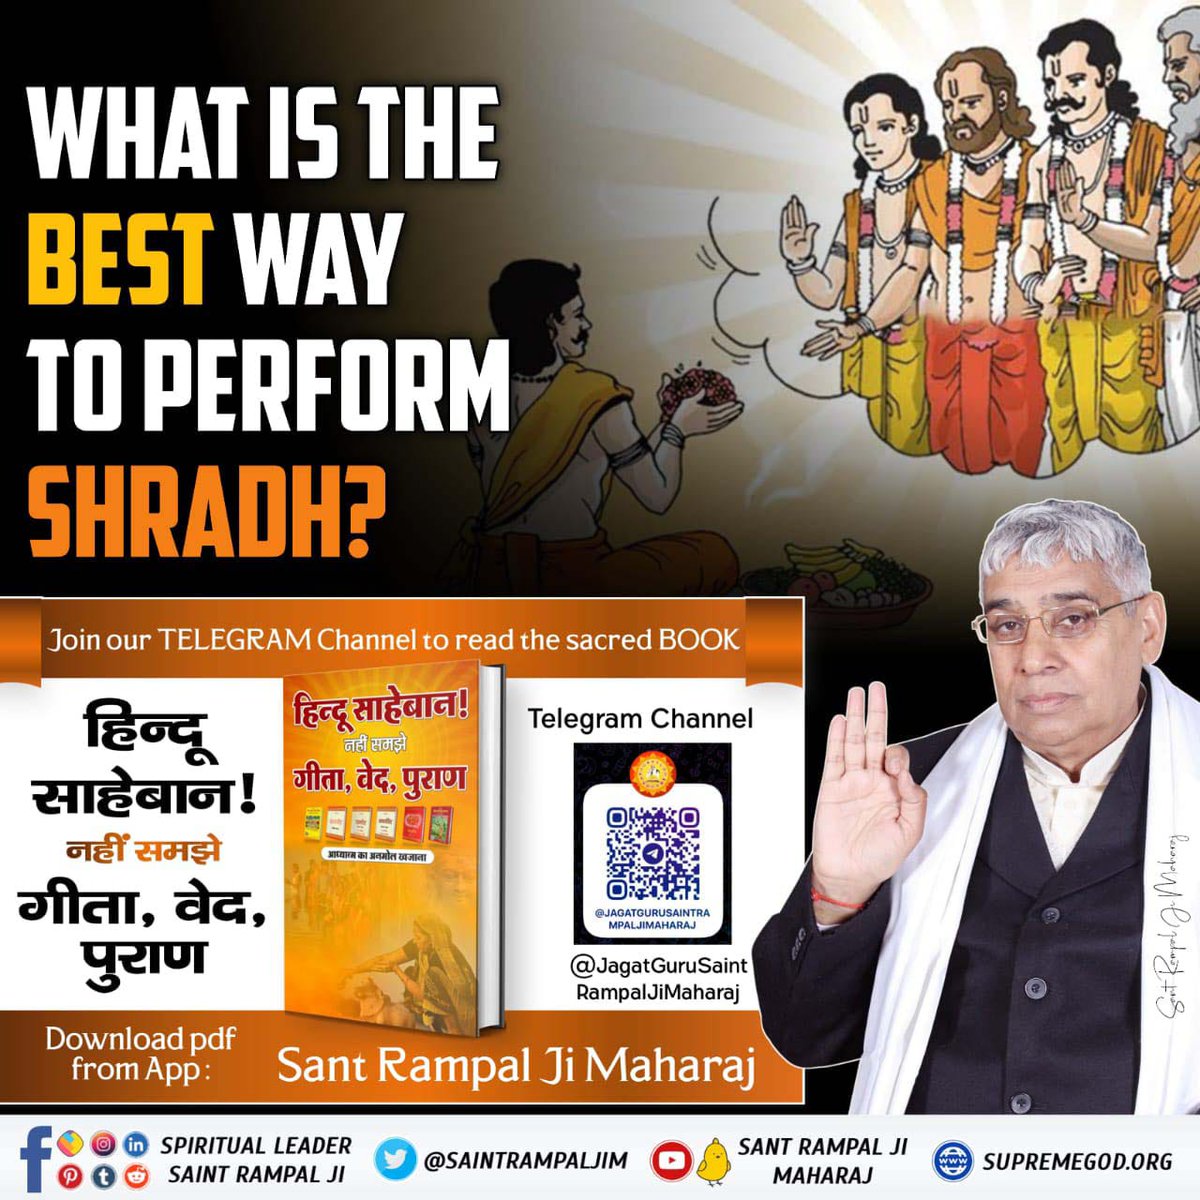 #GodMorningWednesday What is the difference between puja & Sadhna? To find out read the sacred book #हिन्दूसाहेबान_नहीं_समझे गीता वेद पुराण From Sant Rampal Ji Maharaj App.